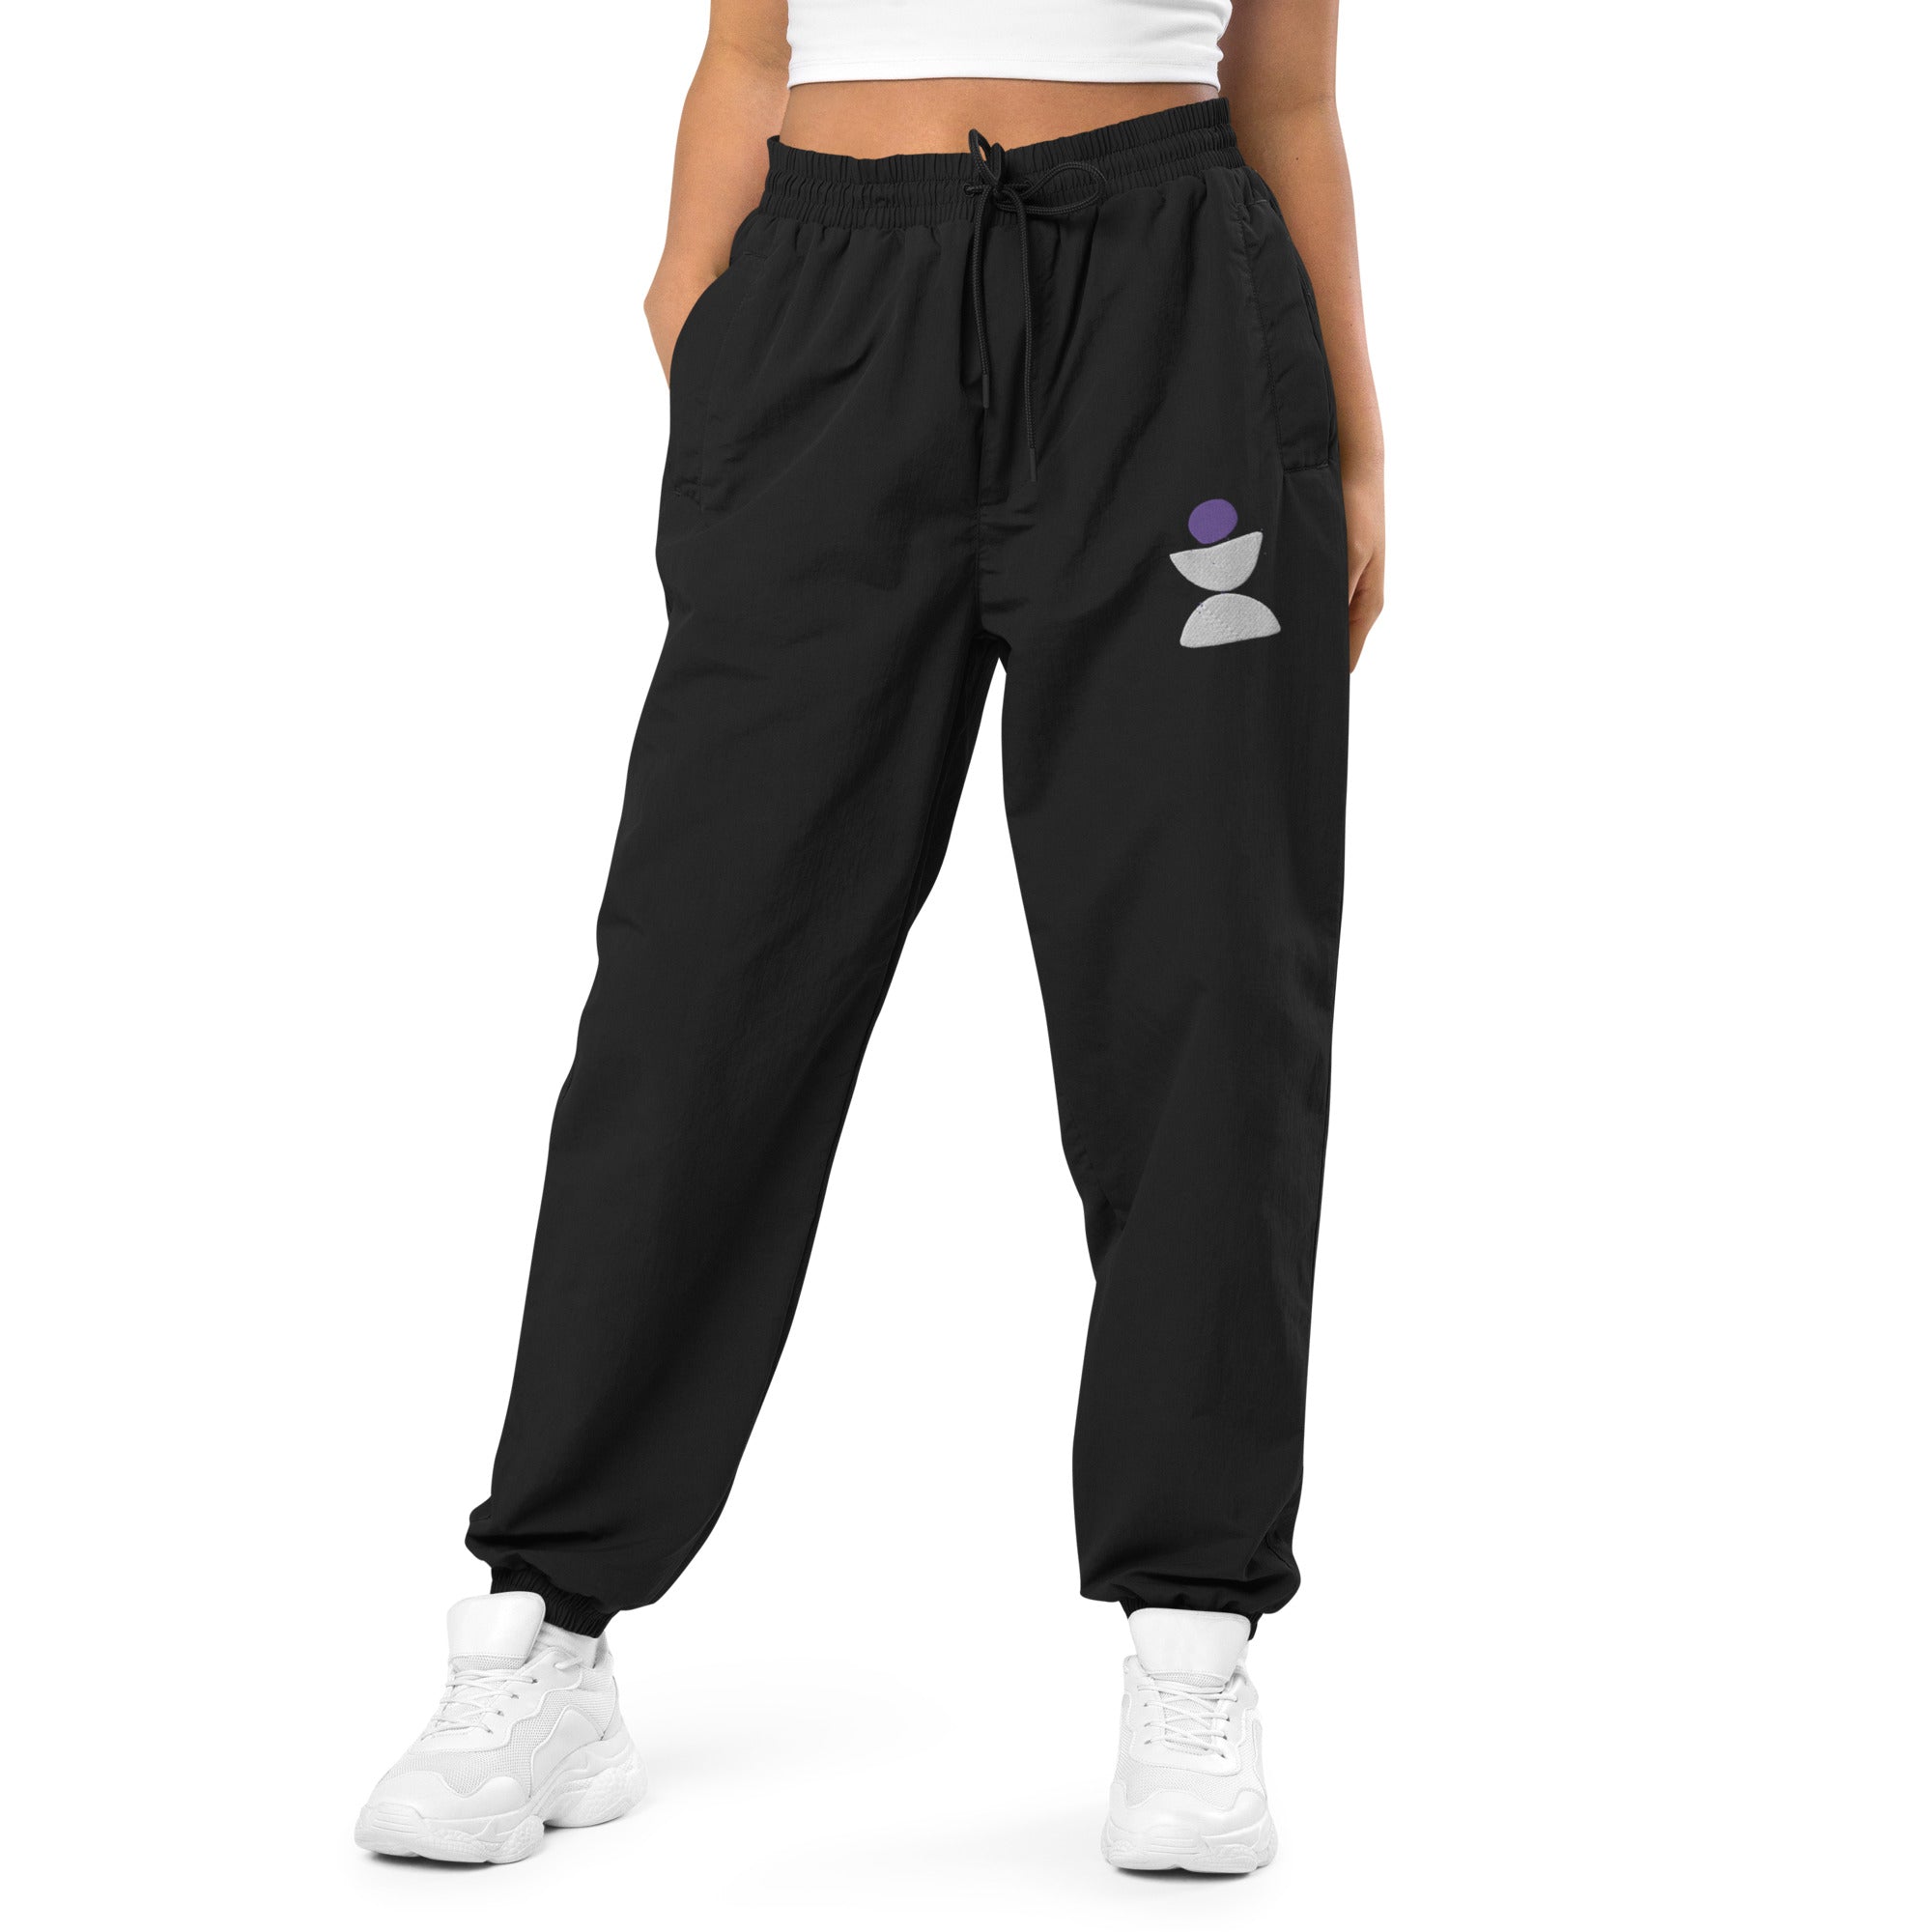 Zen Mastery - Recycled tracksuit trousers for zen and yoga - Personal Hour for Yoga and Meditations 